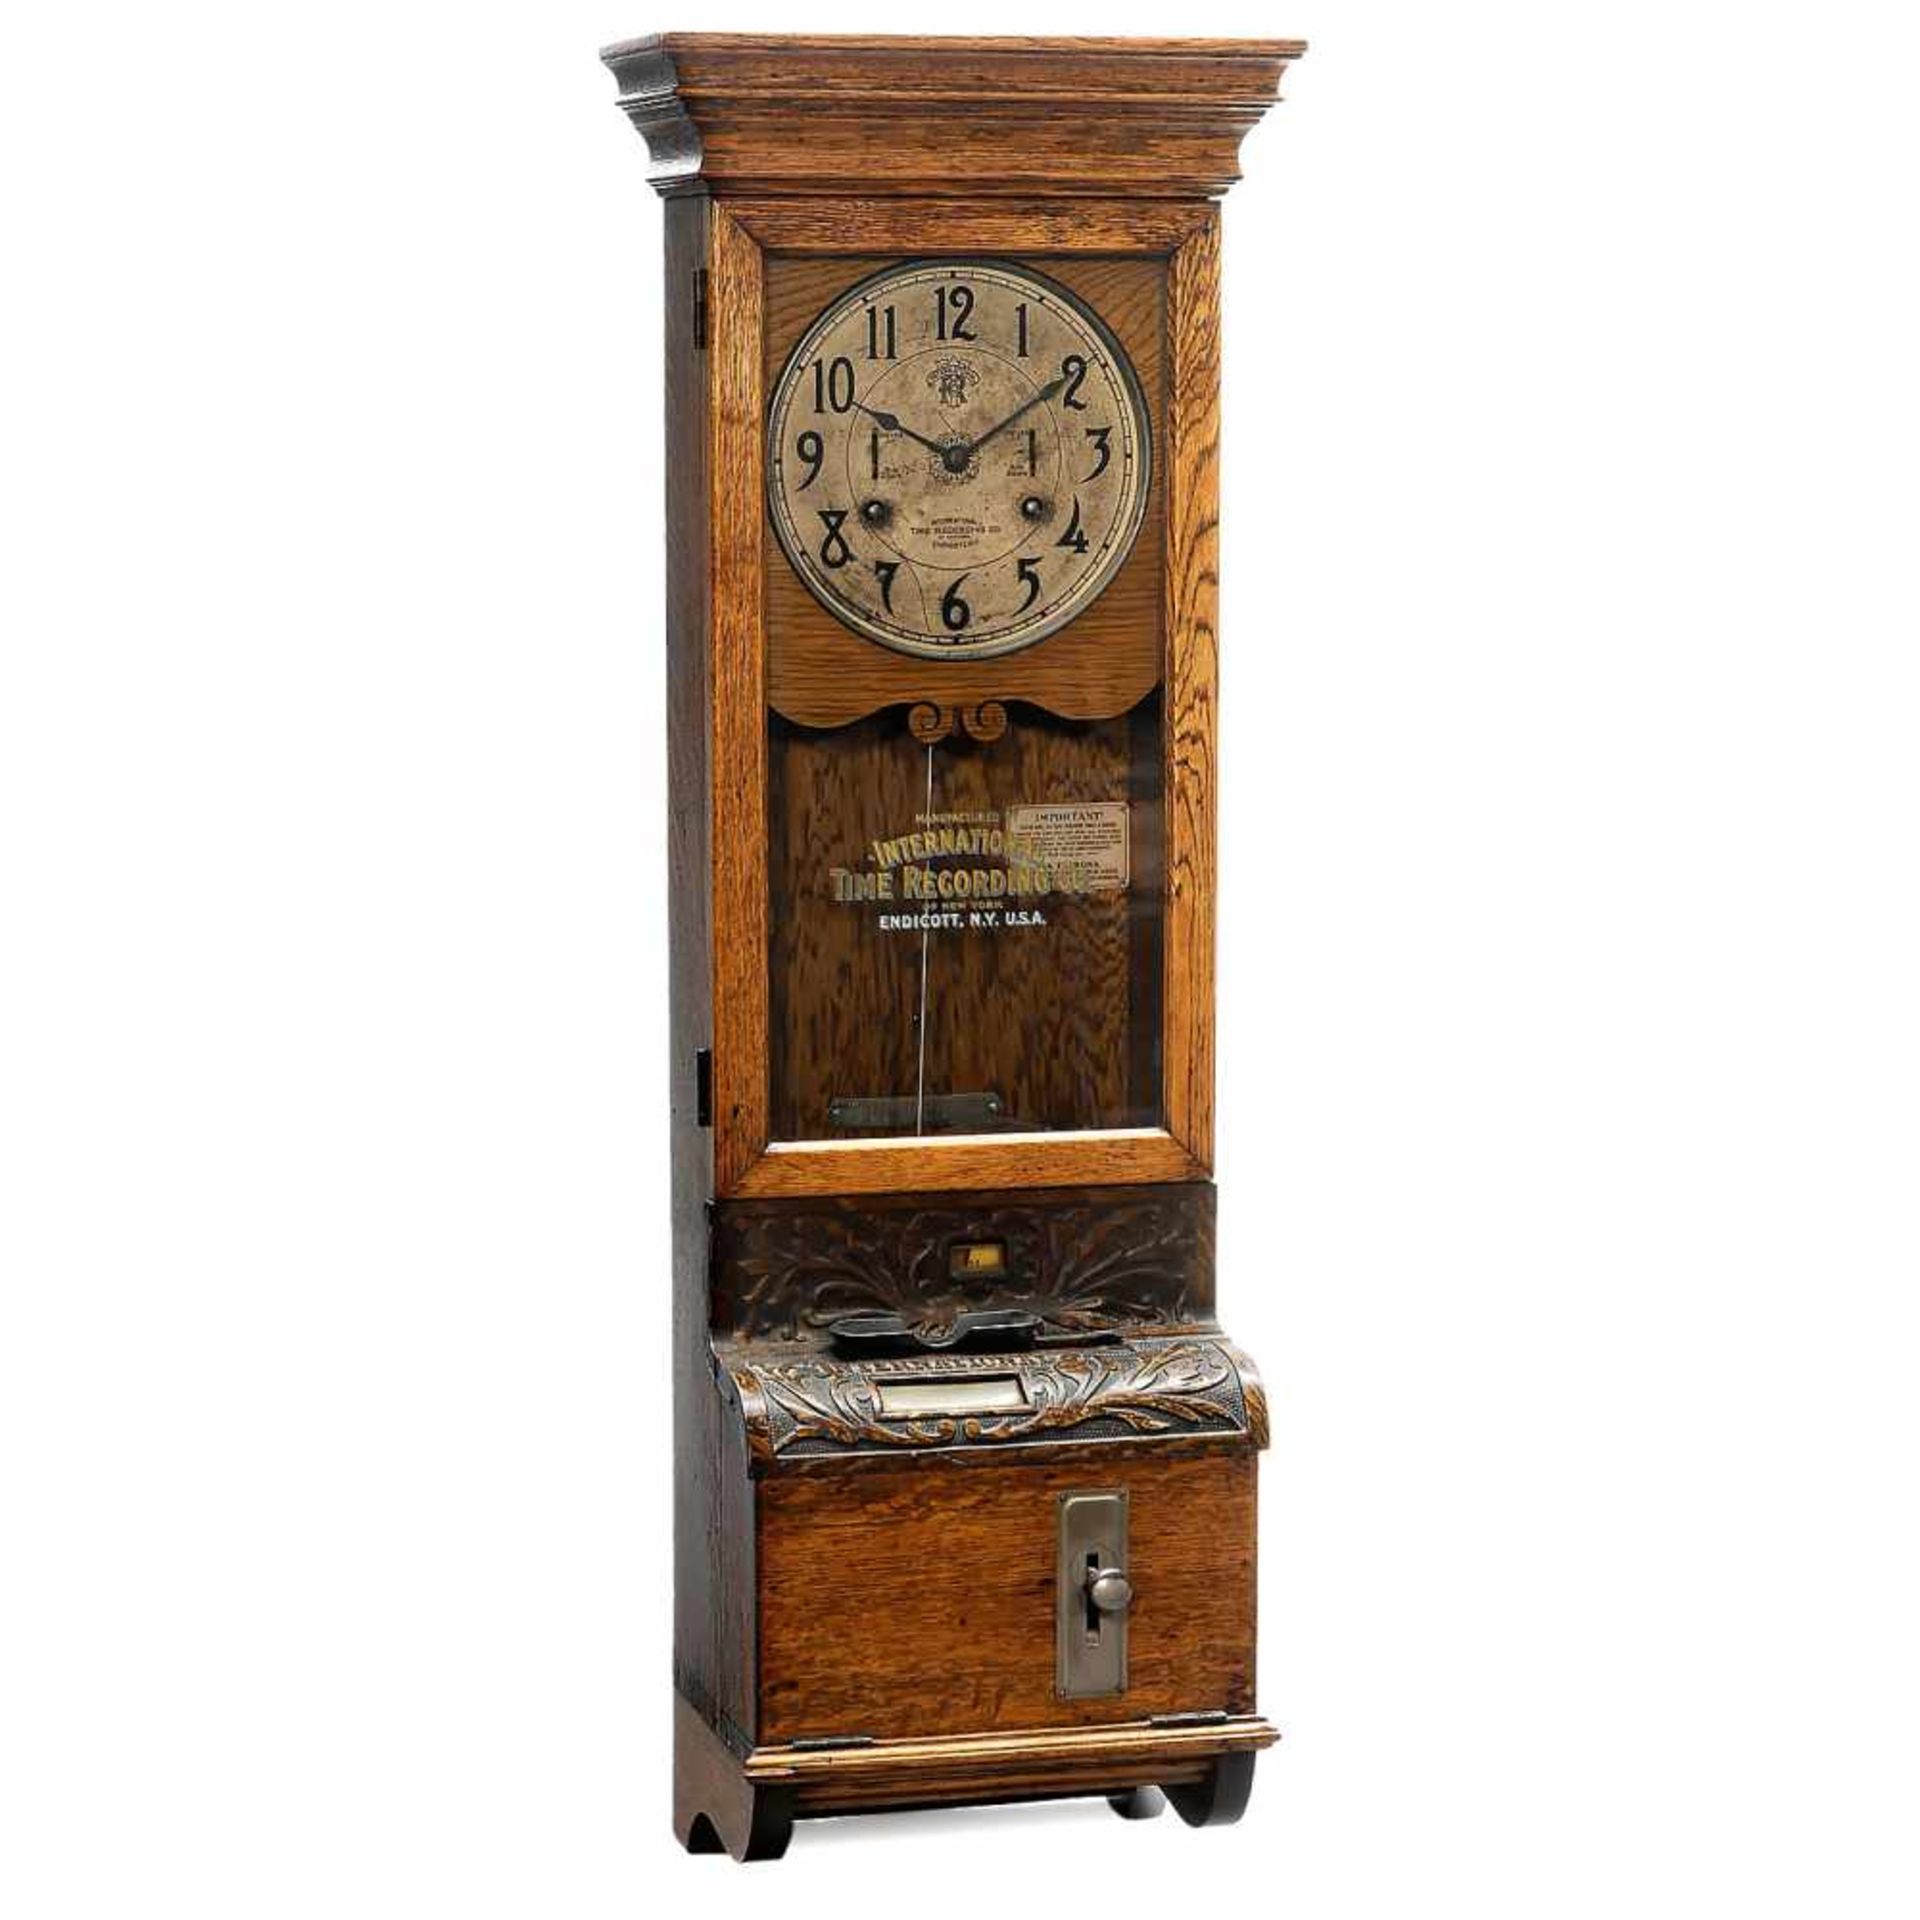 American Time Clock, c. 1905International Time Recording Company (ITR), New York, invented and